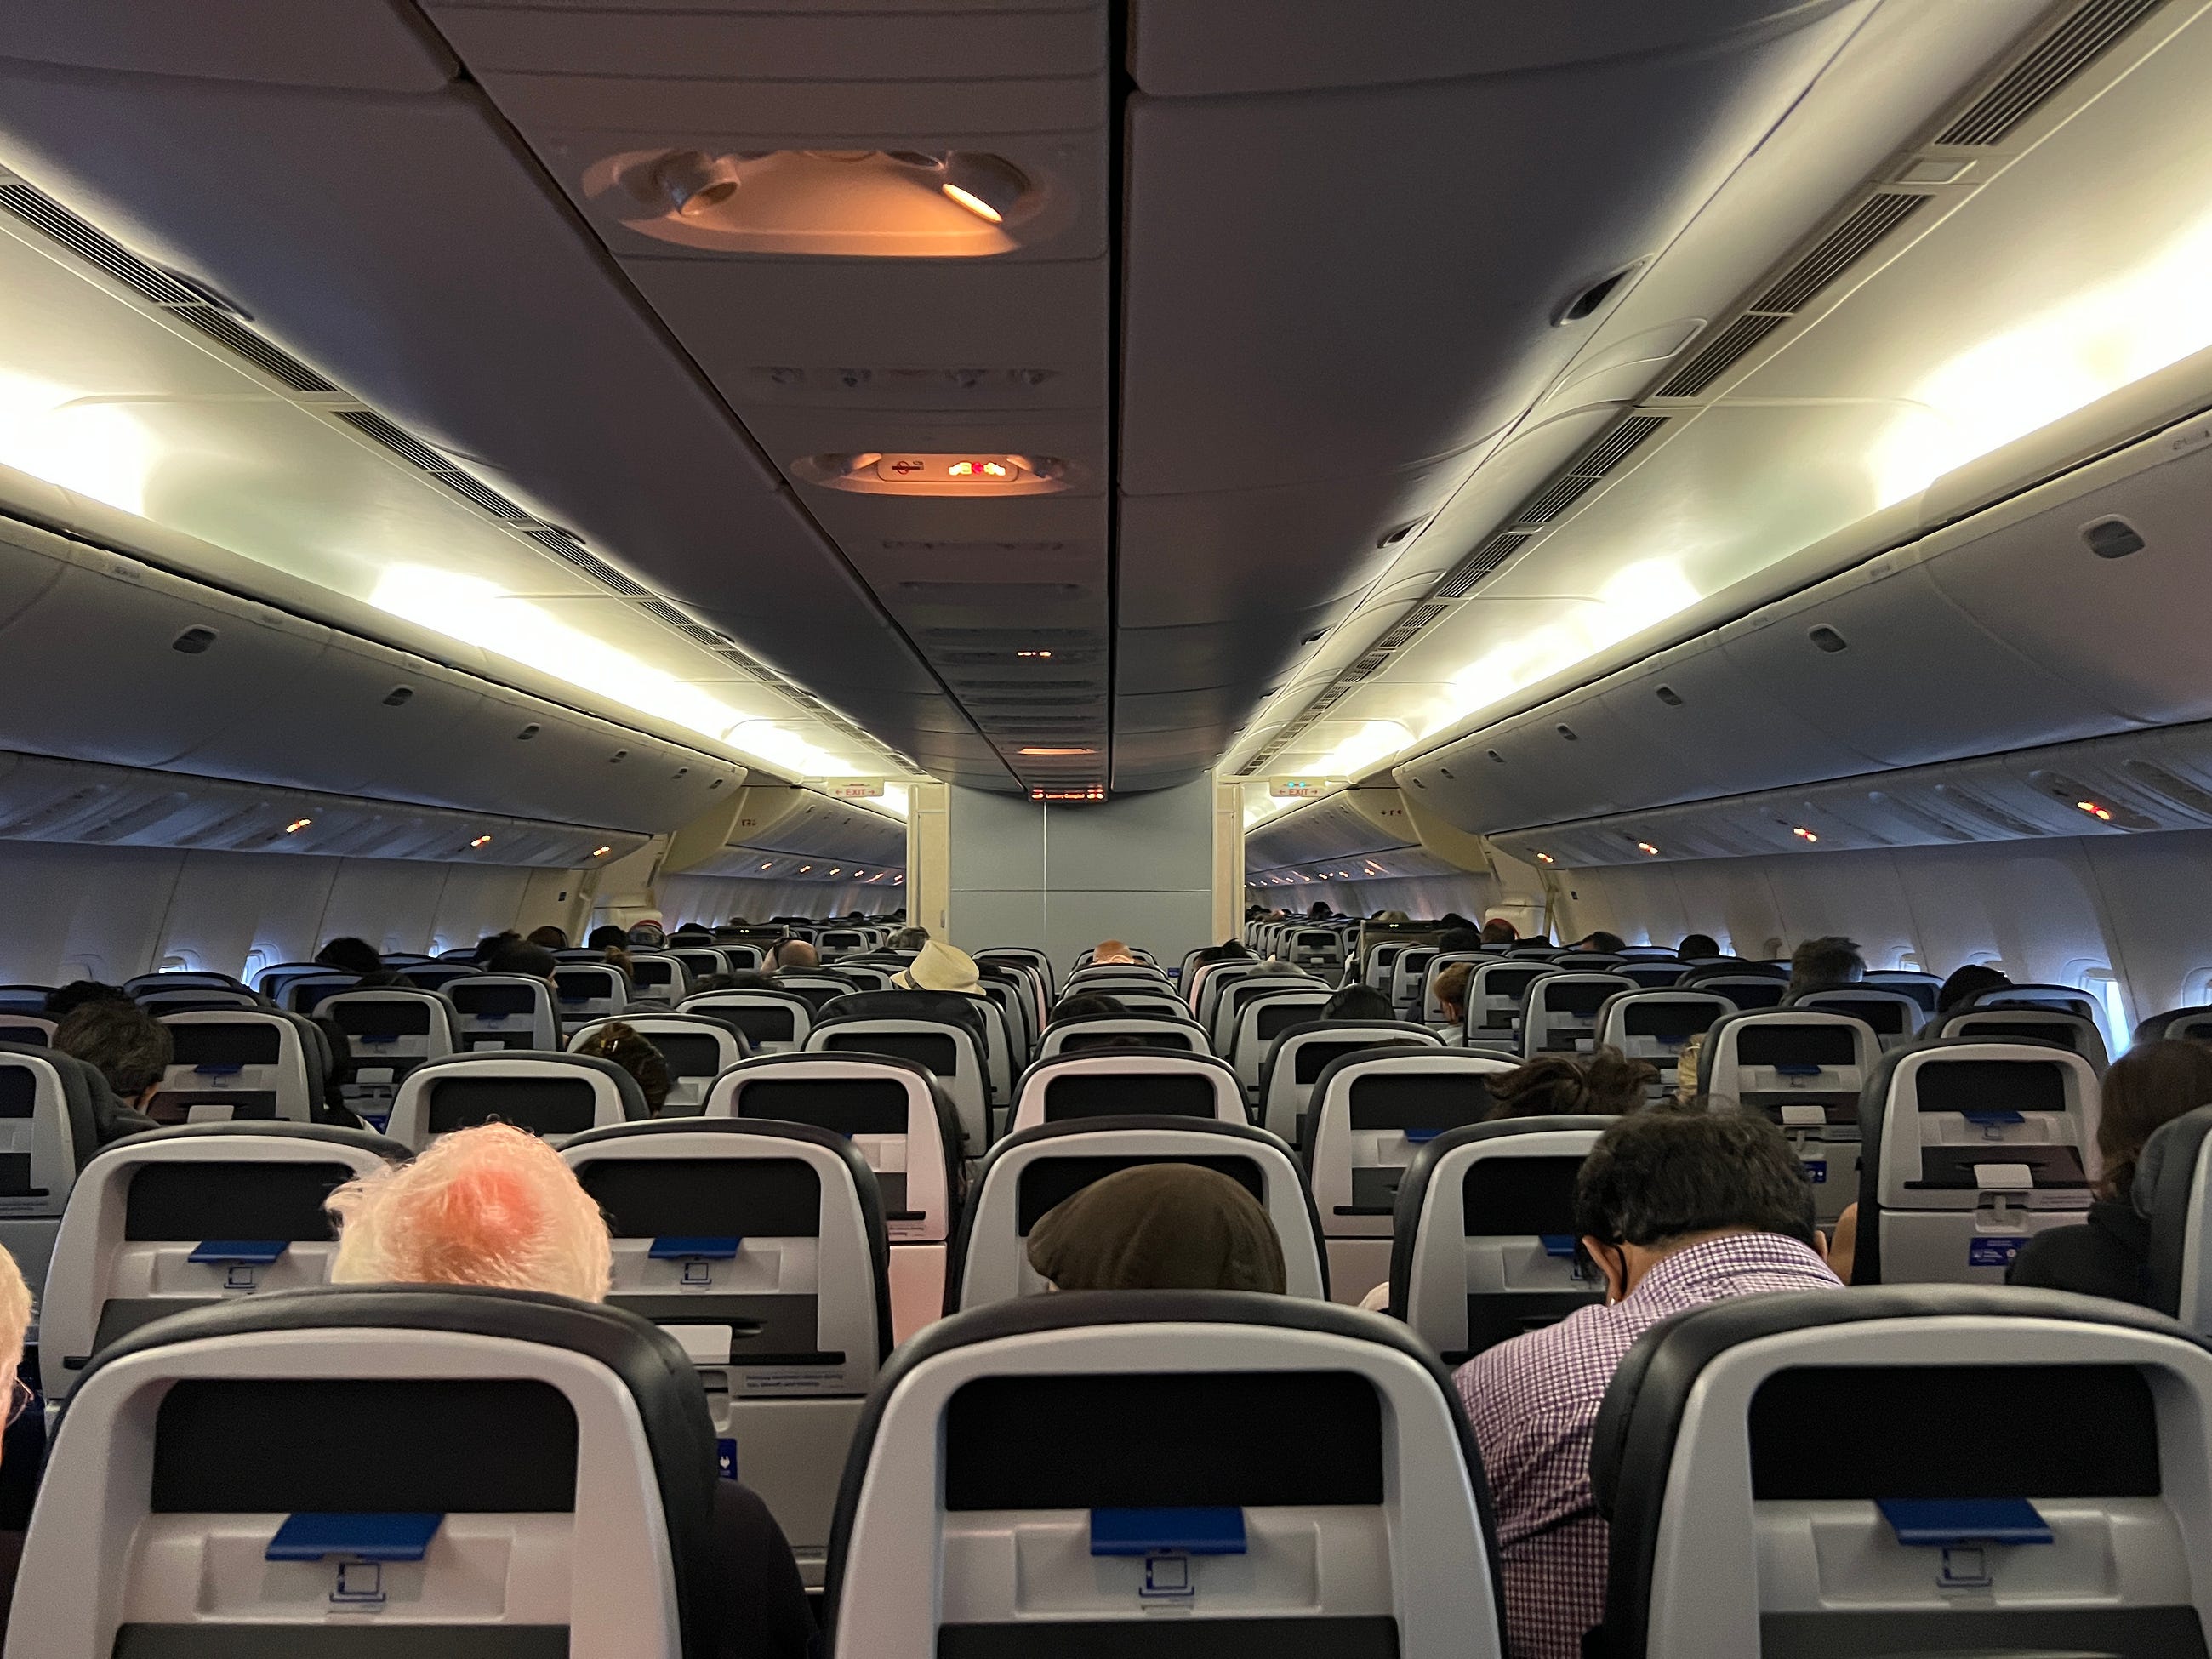 Airlines Now Squeeze 10 People Into a Single Row In Economy